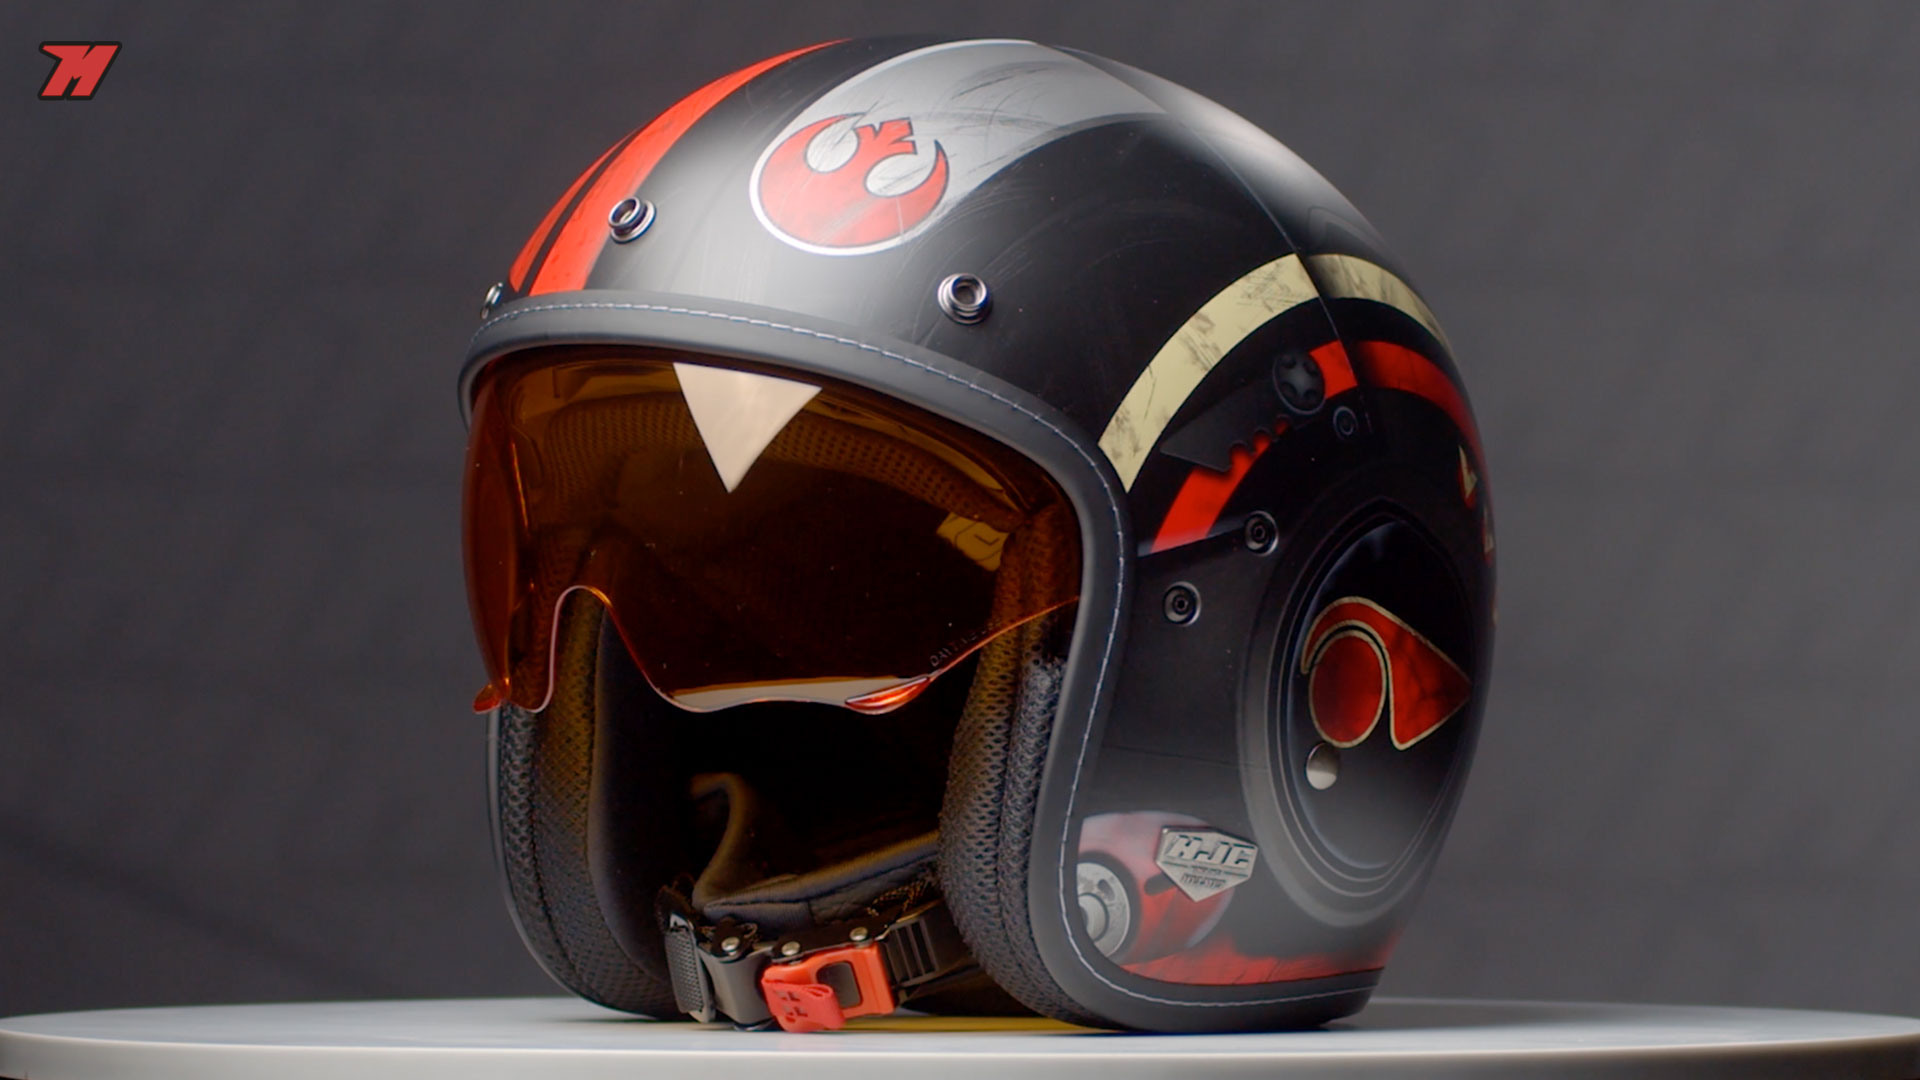 TOP 4 Best Star Wars Motorcycle Helmets. Which one do you prefer